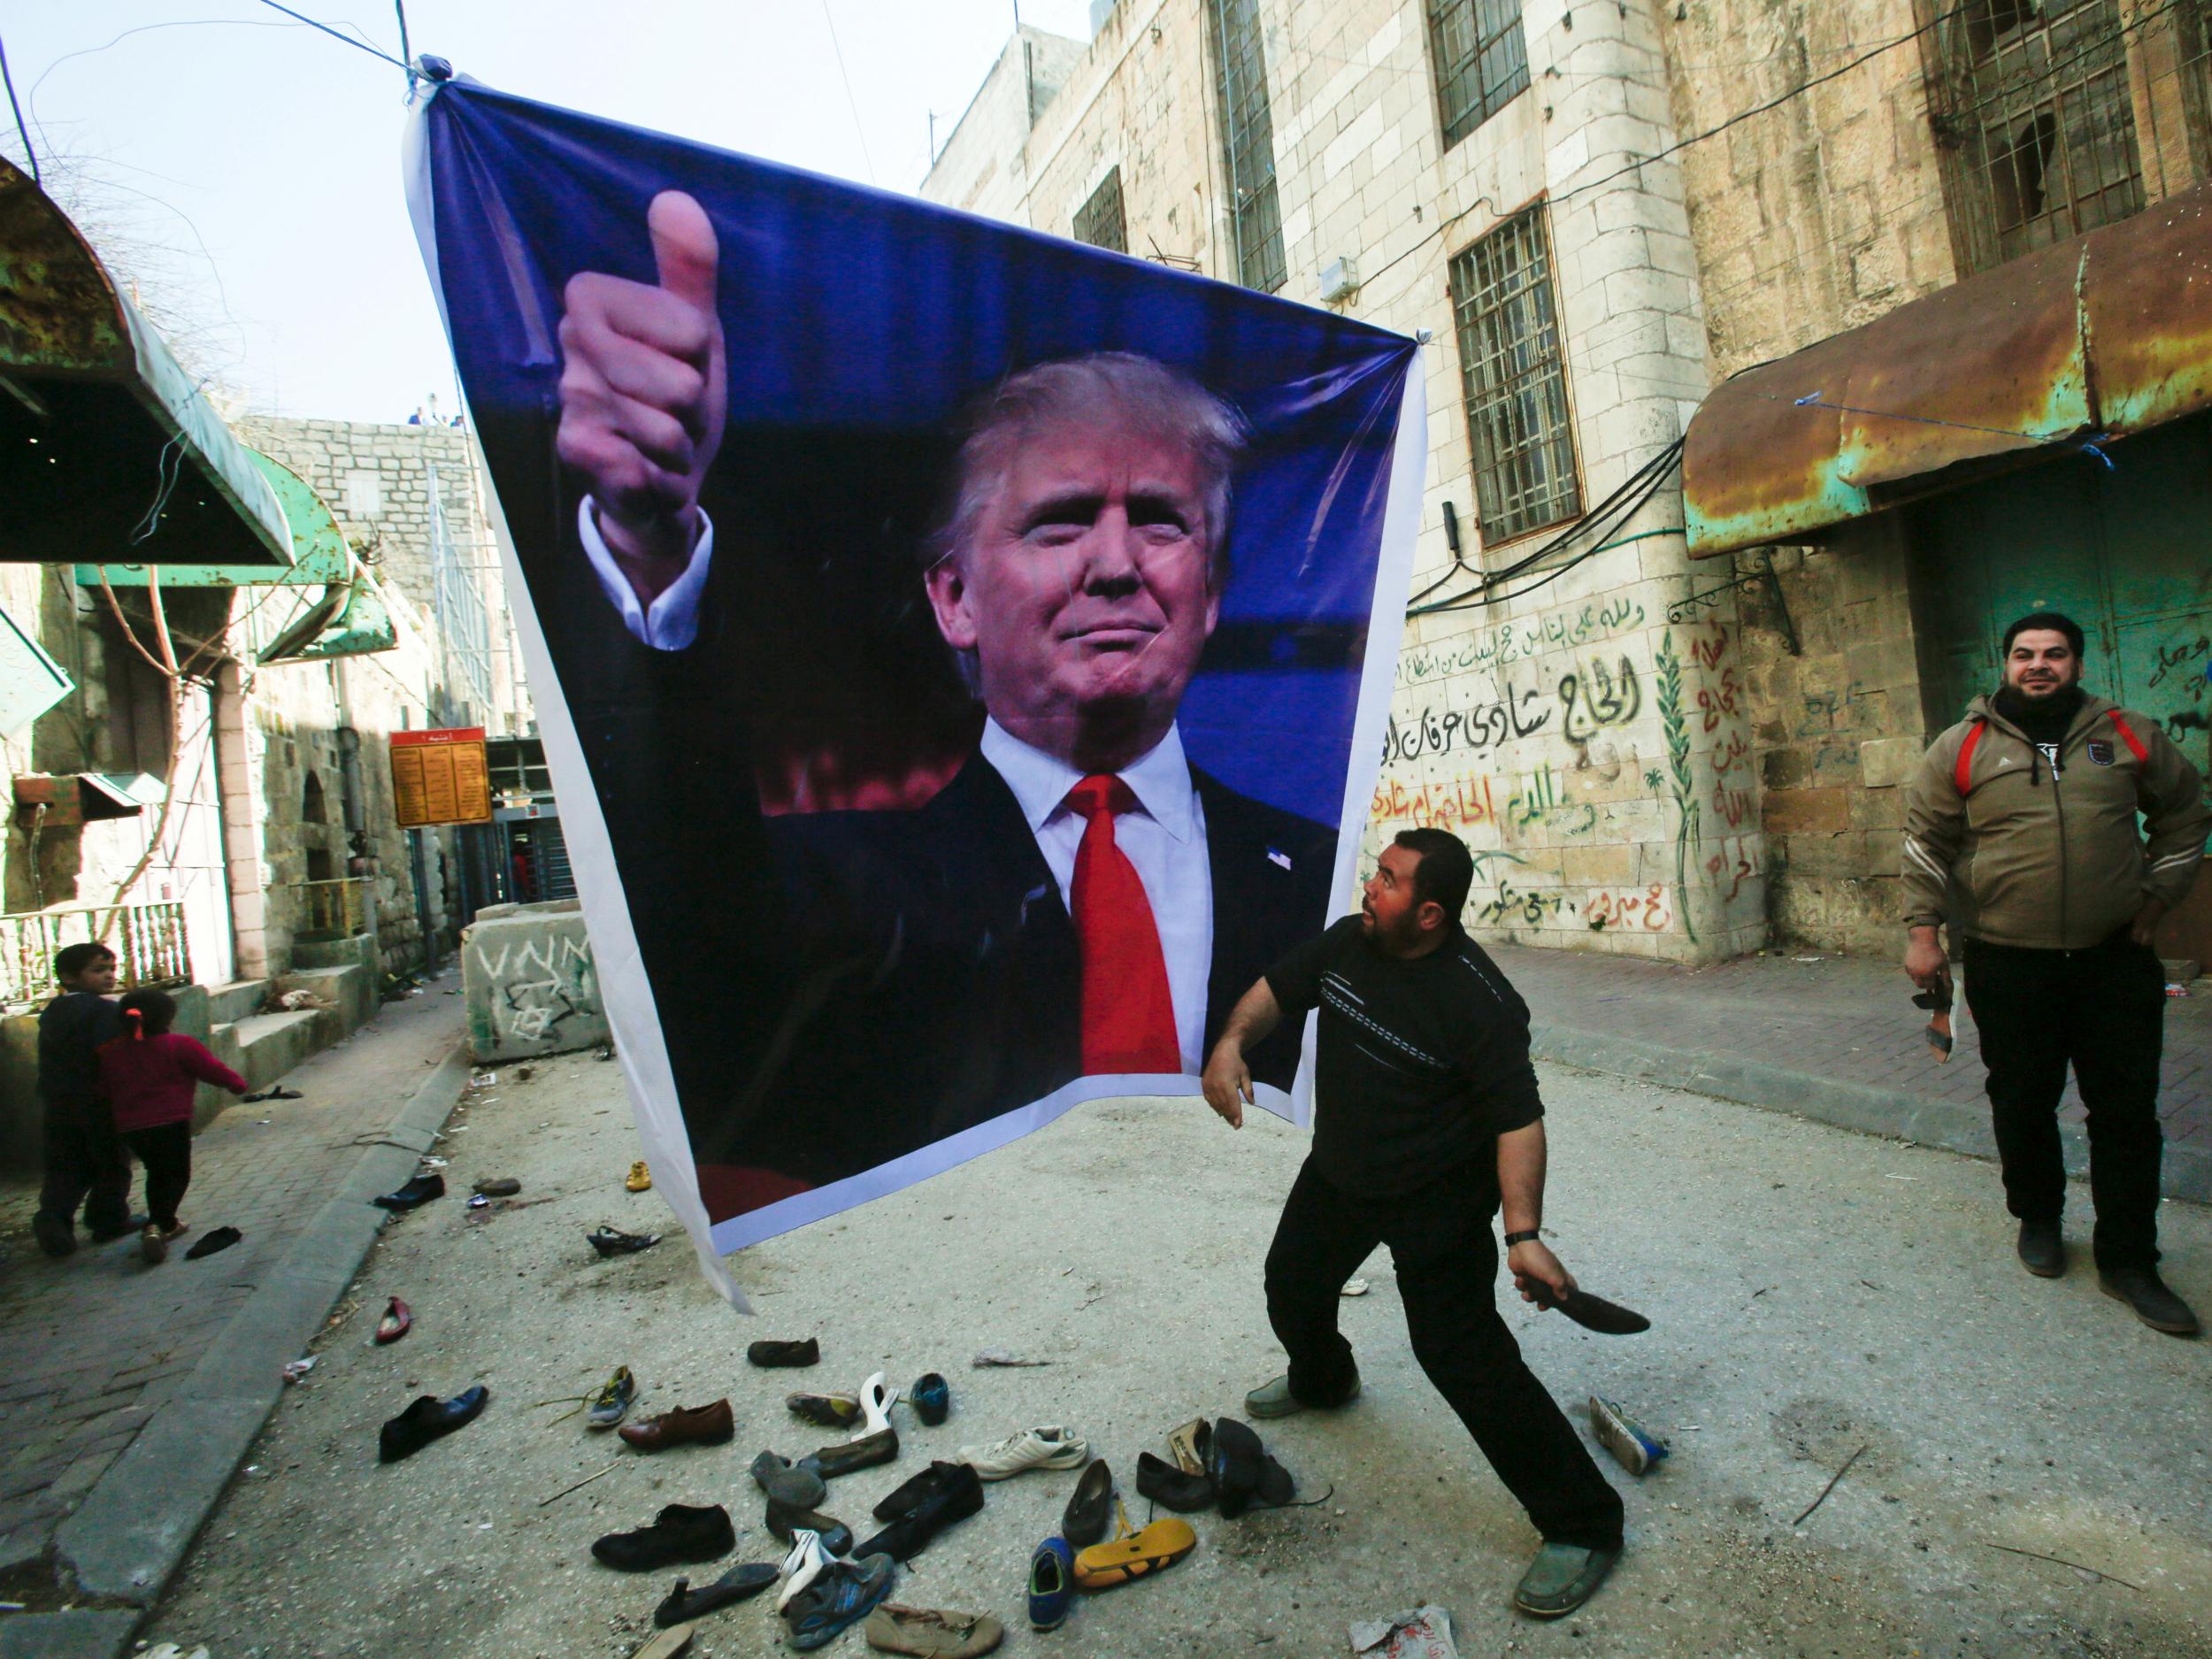 A Palestinian demonstrator throws a shoe at a poster of US President Donald Trump during a protest in the West Bank city of Hebron